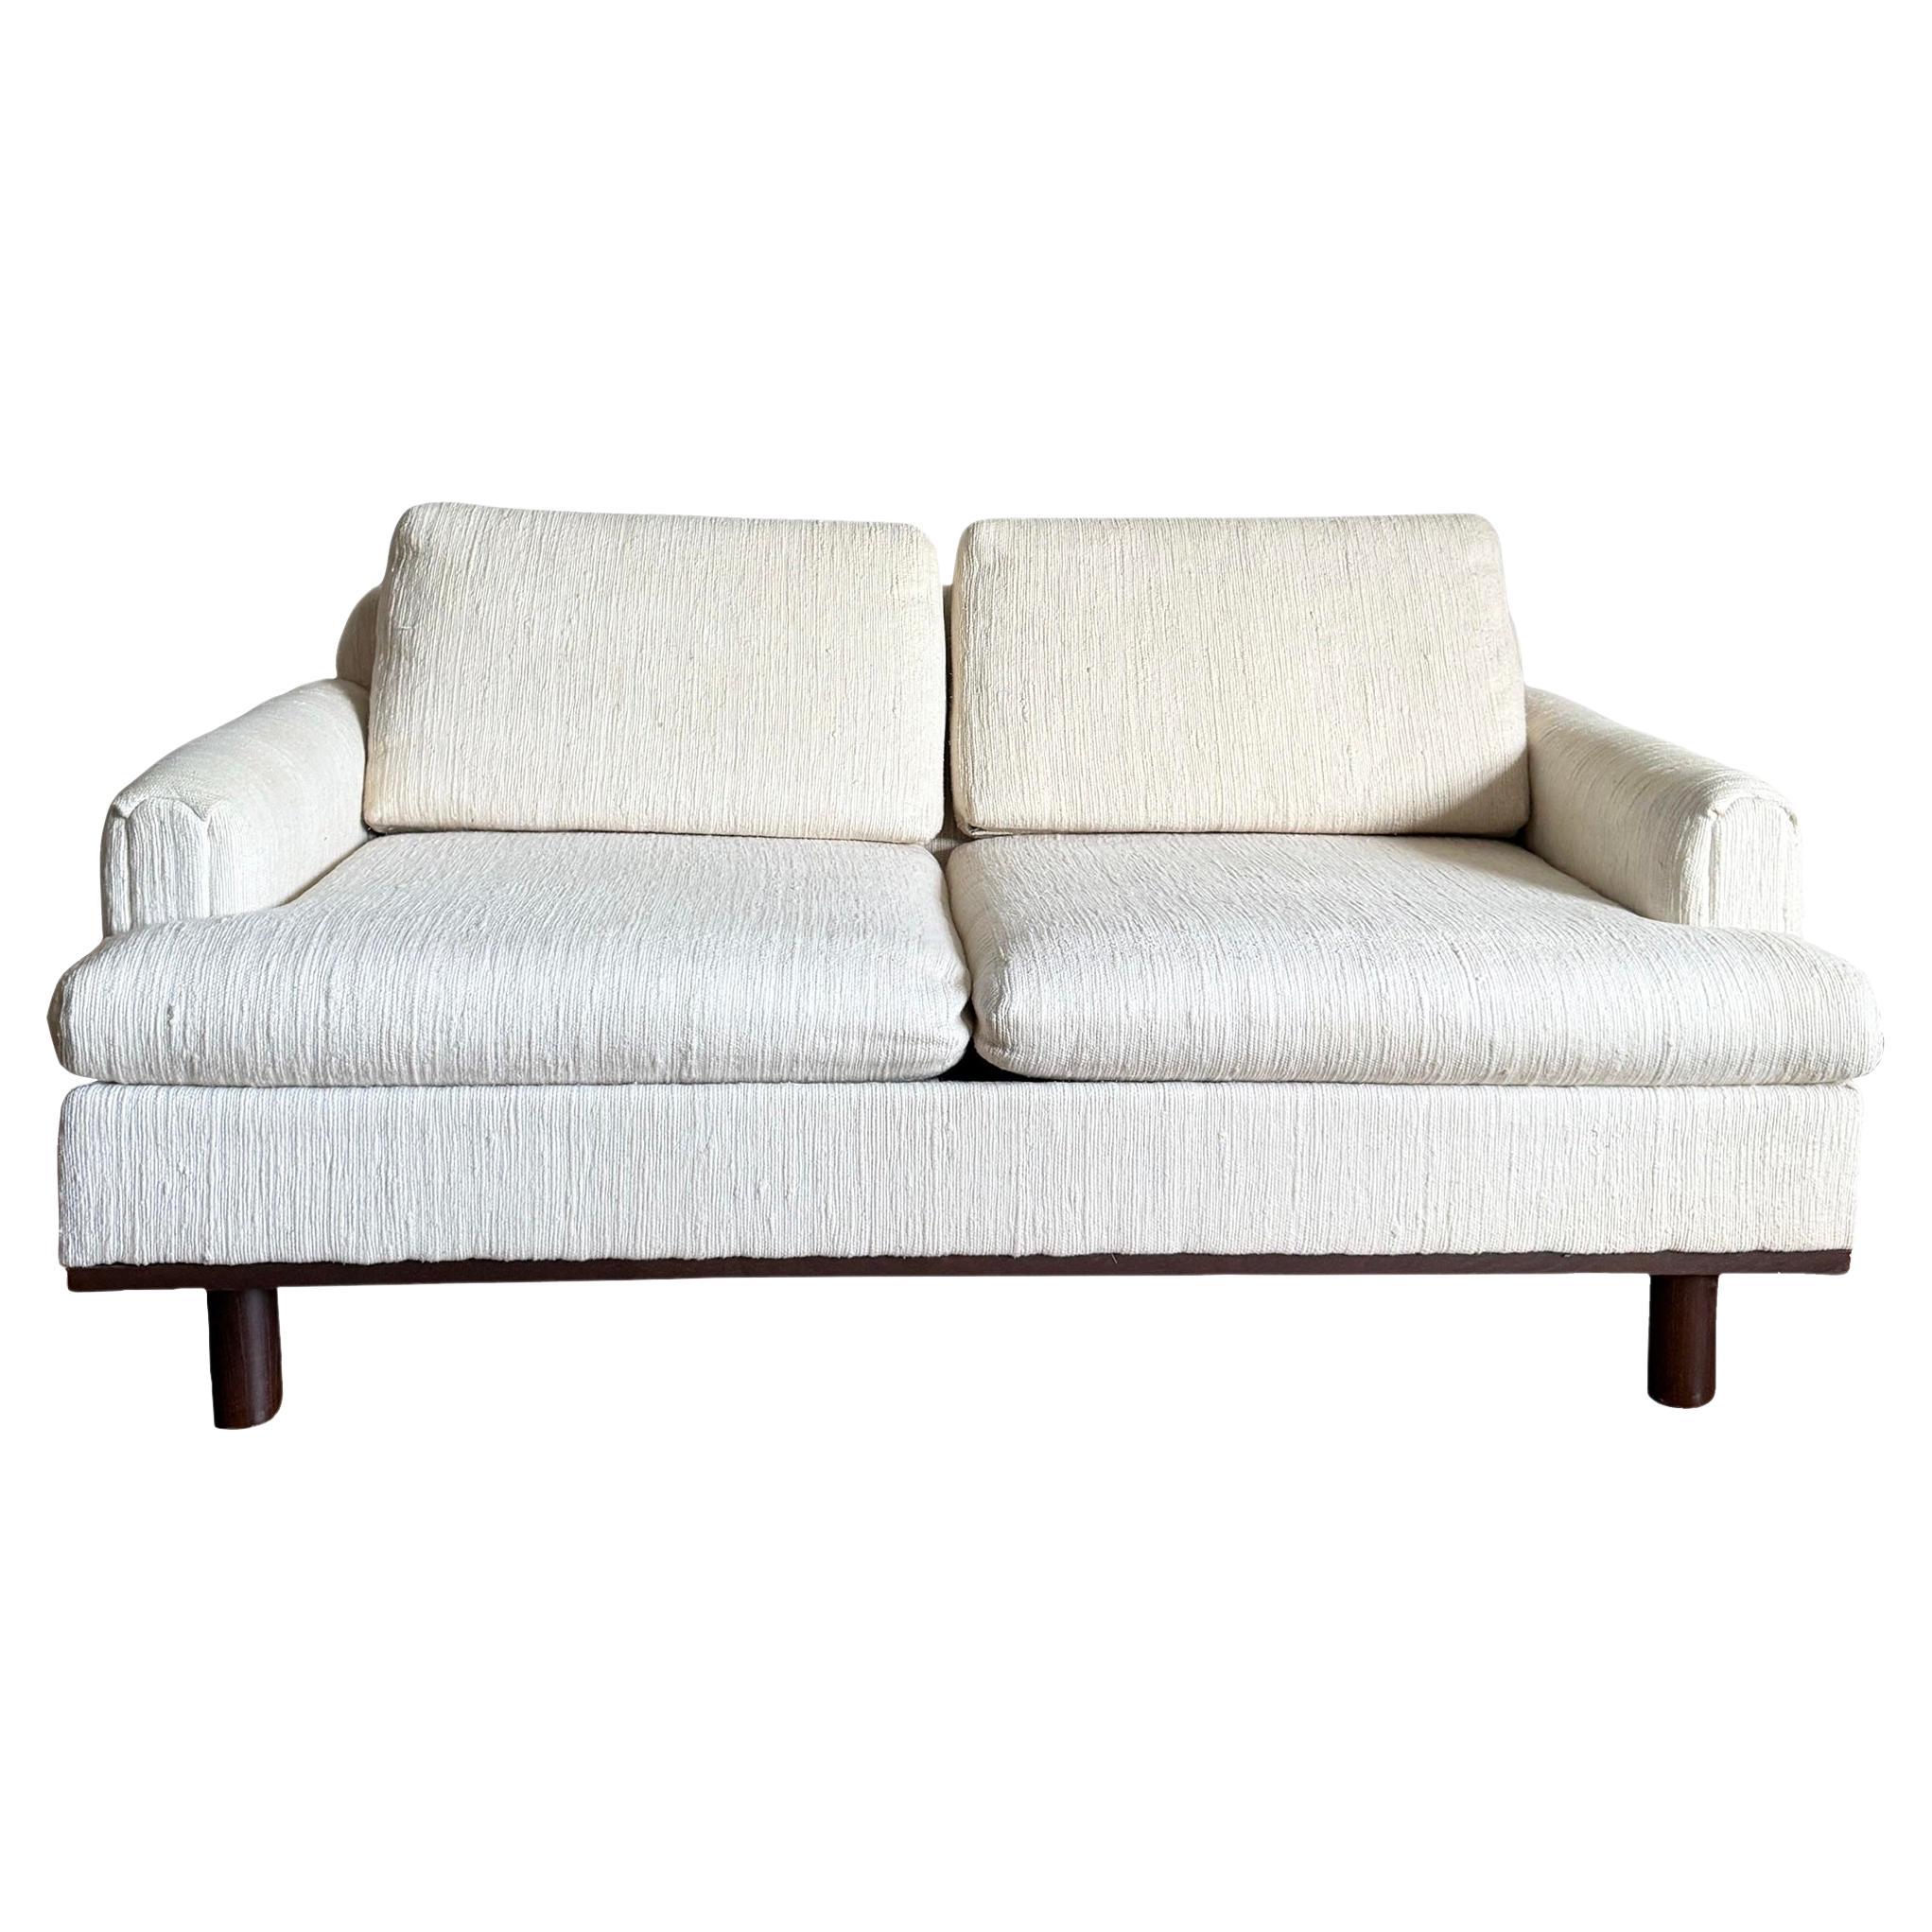 1970s Vintage Mid Century Modern Loveseat by Selig For Sale